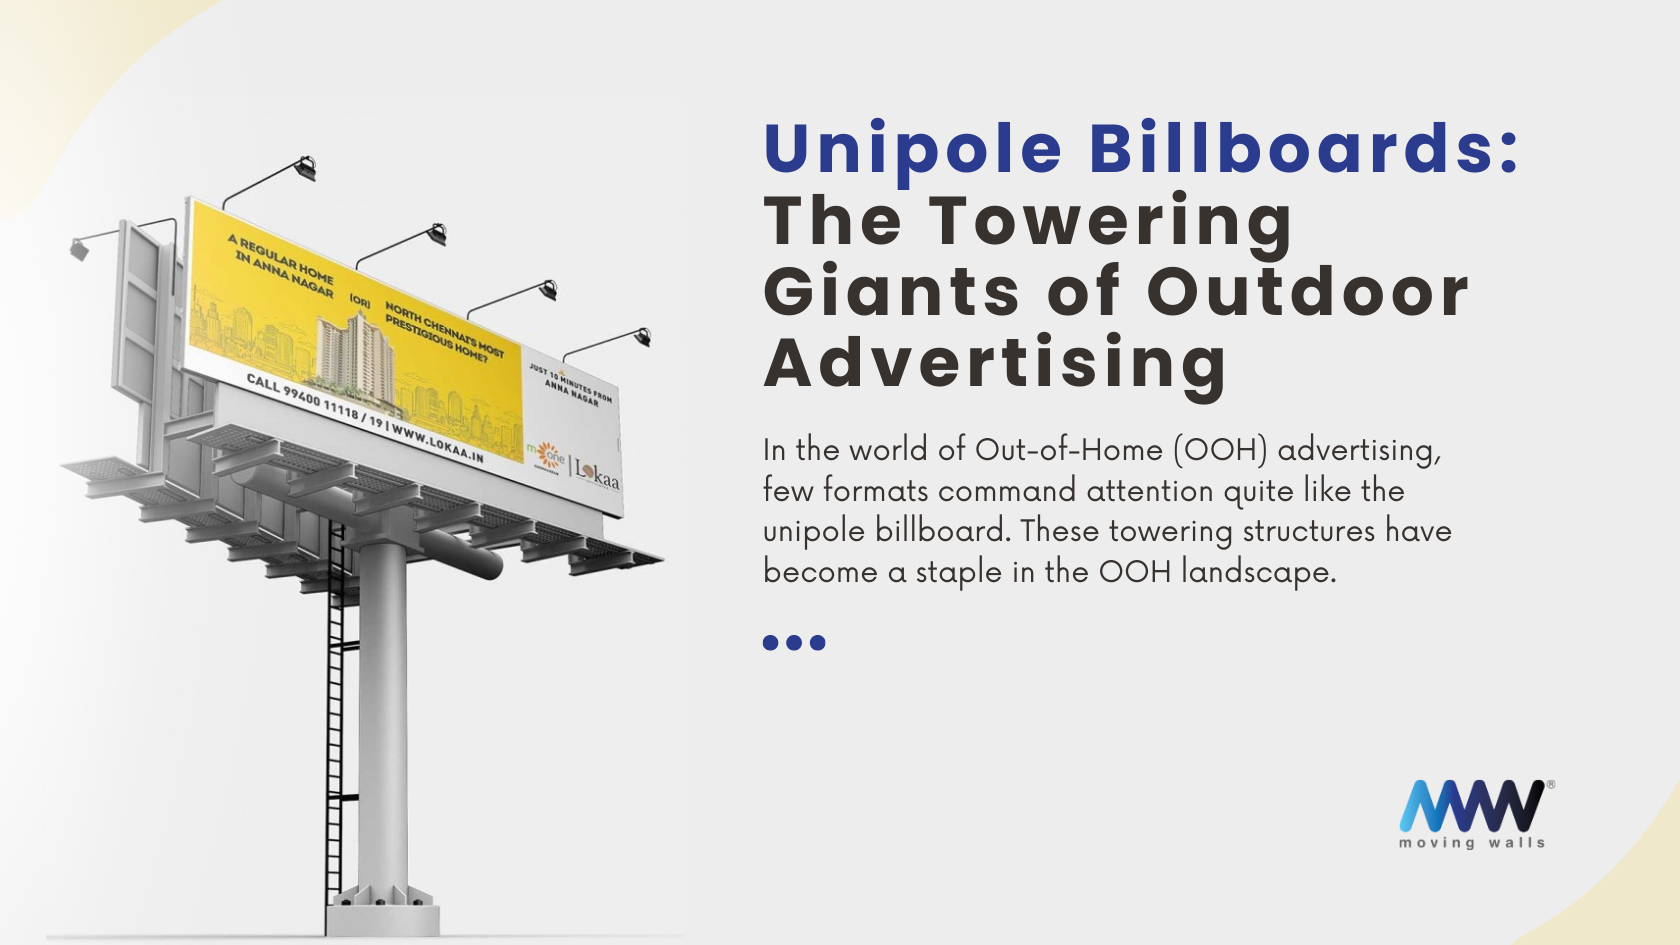 Unipole Billboards: The Towering Giants of Outdoor Advertising